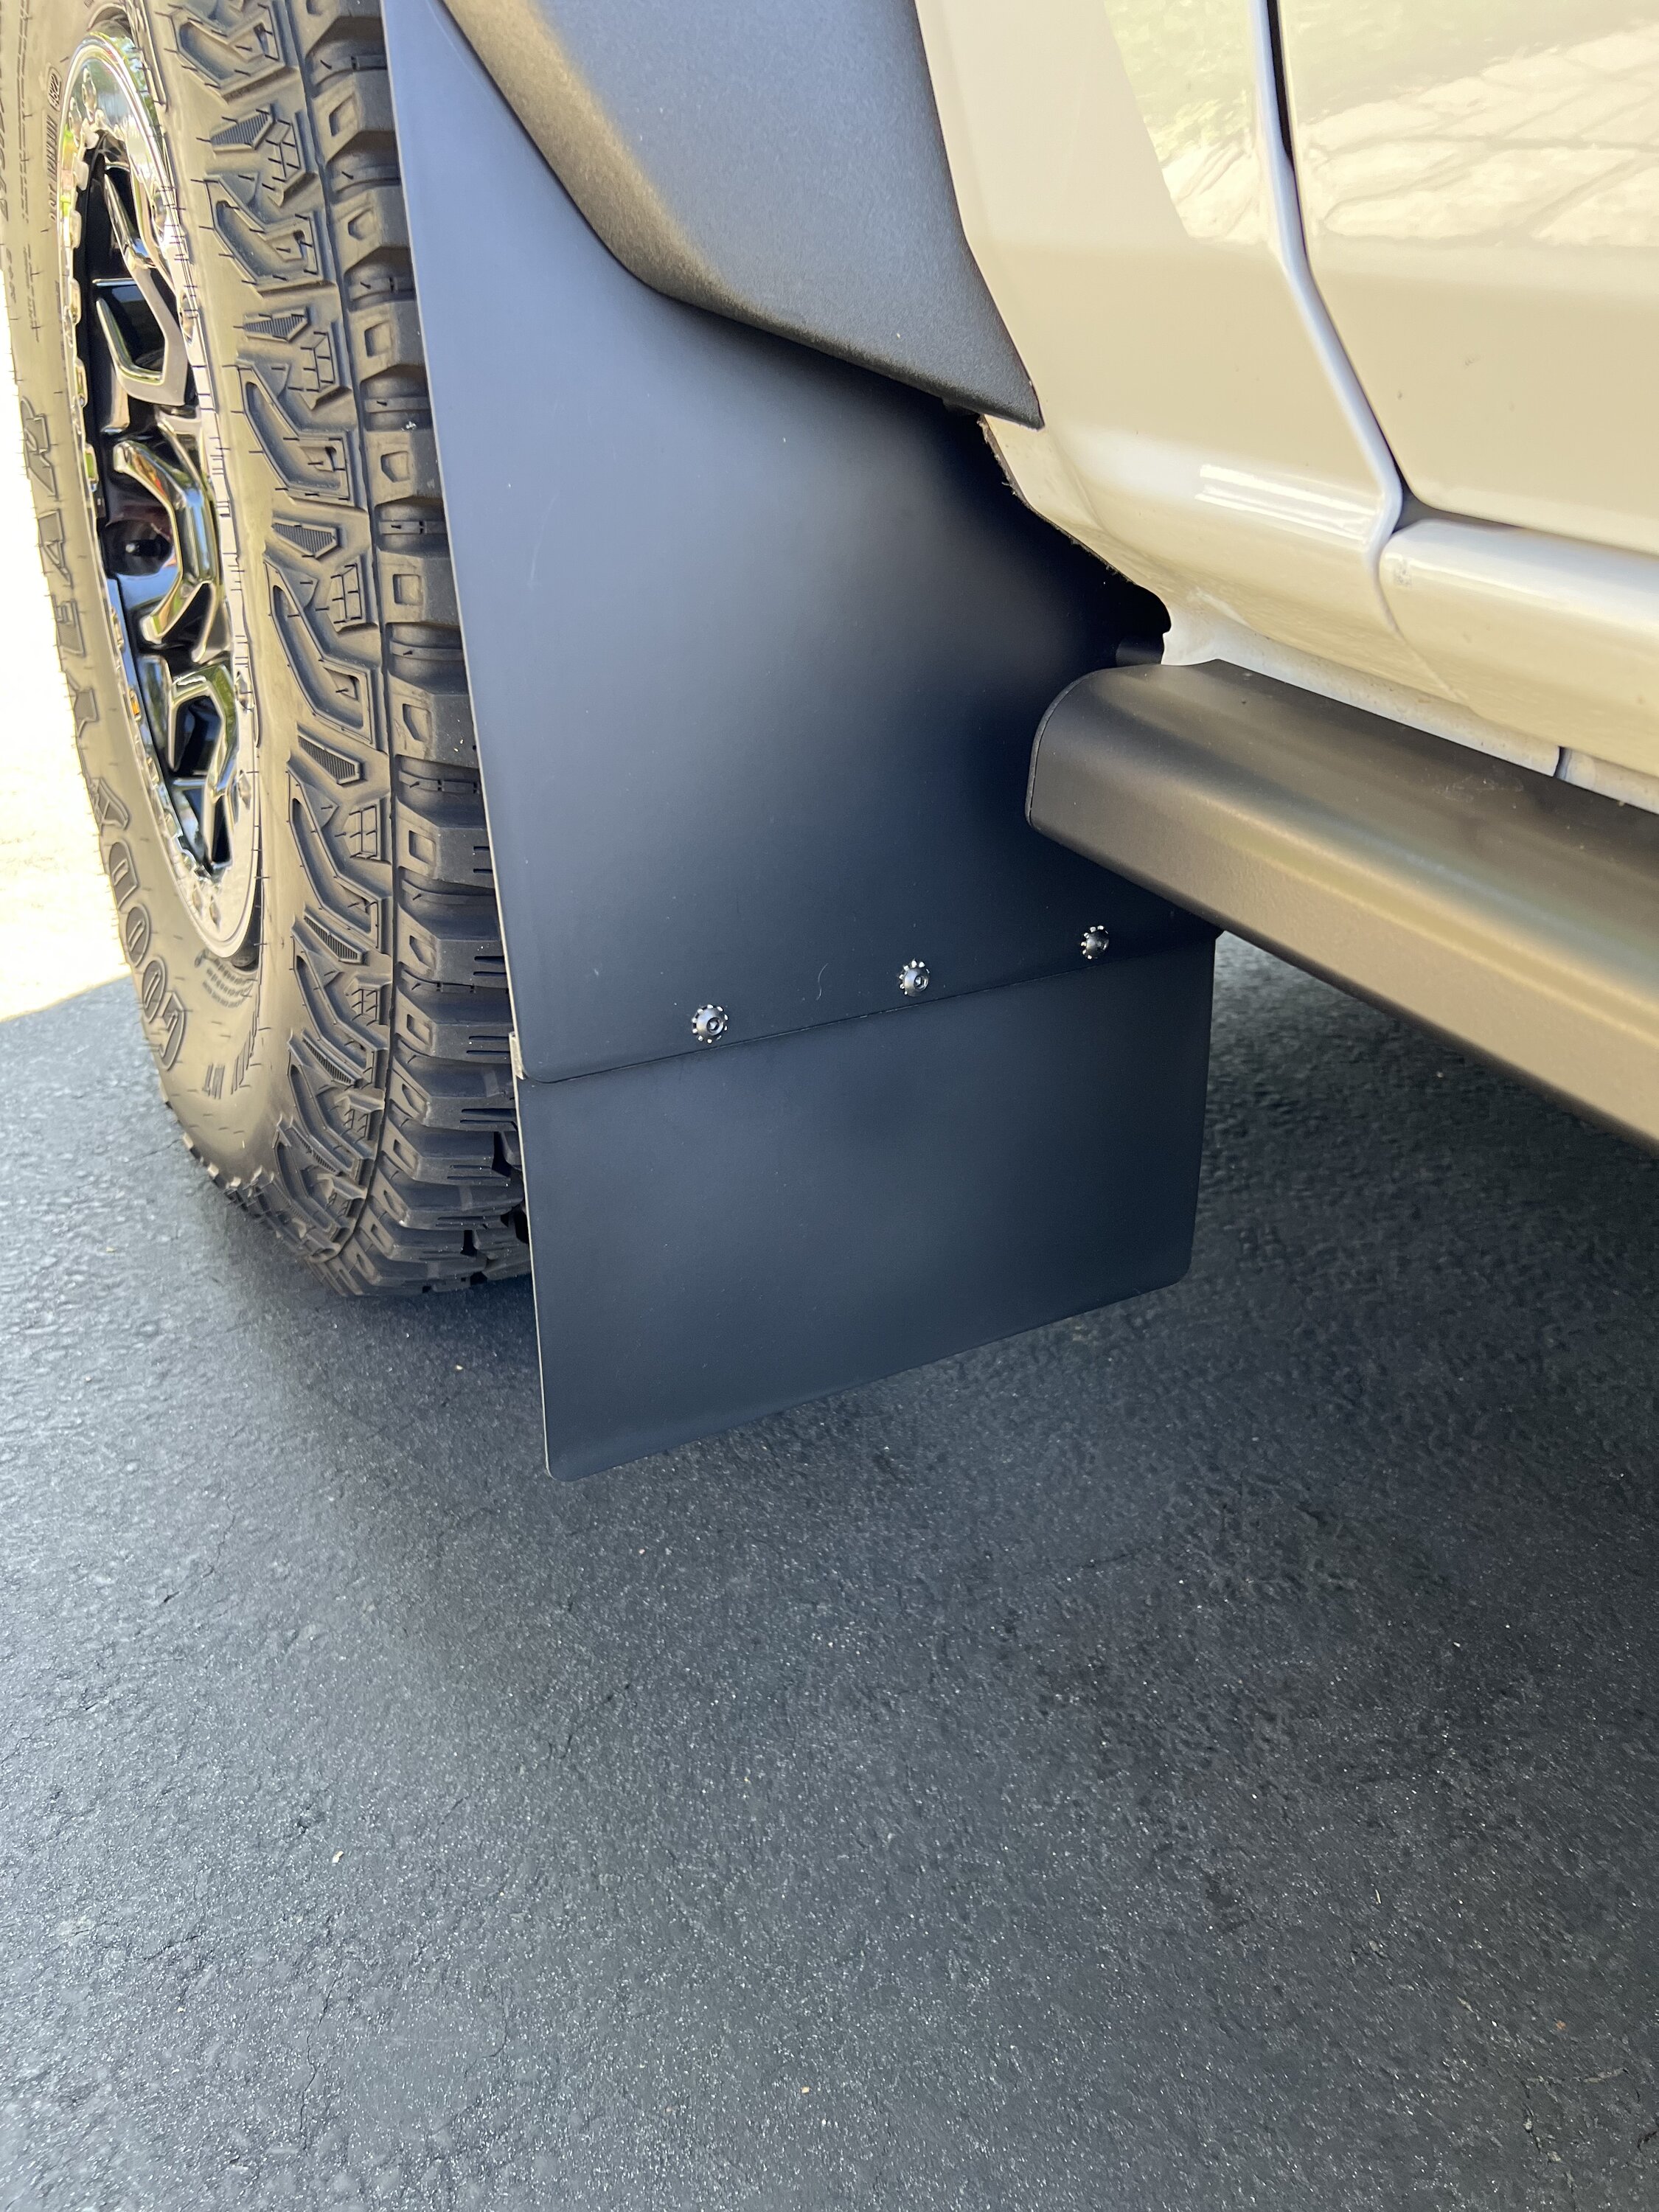 Ford Bronco Mud Flaps to go with Hoop Steps? IMG_1236